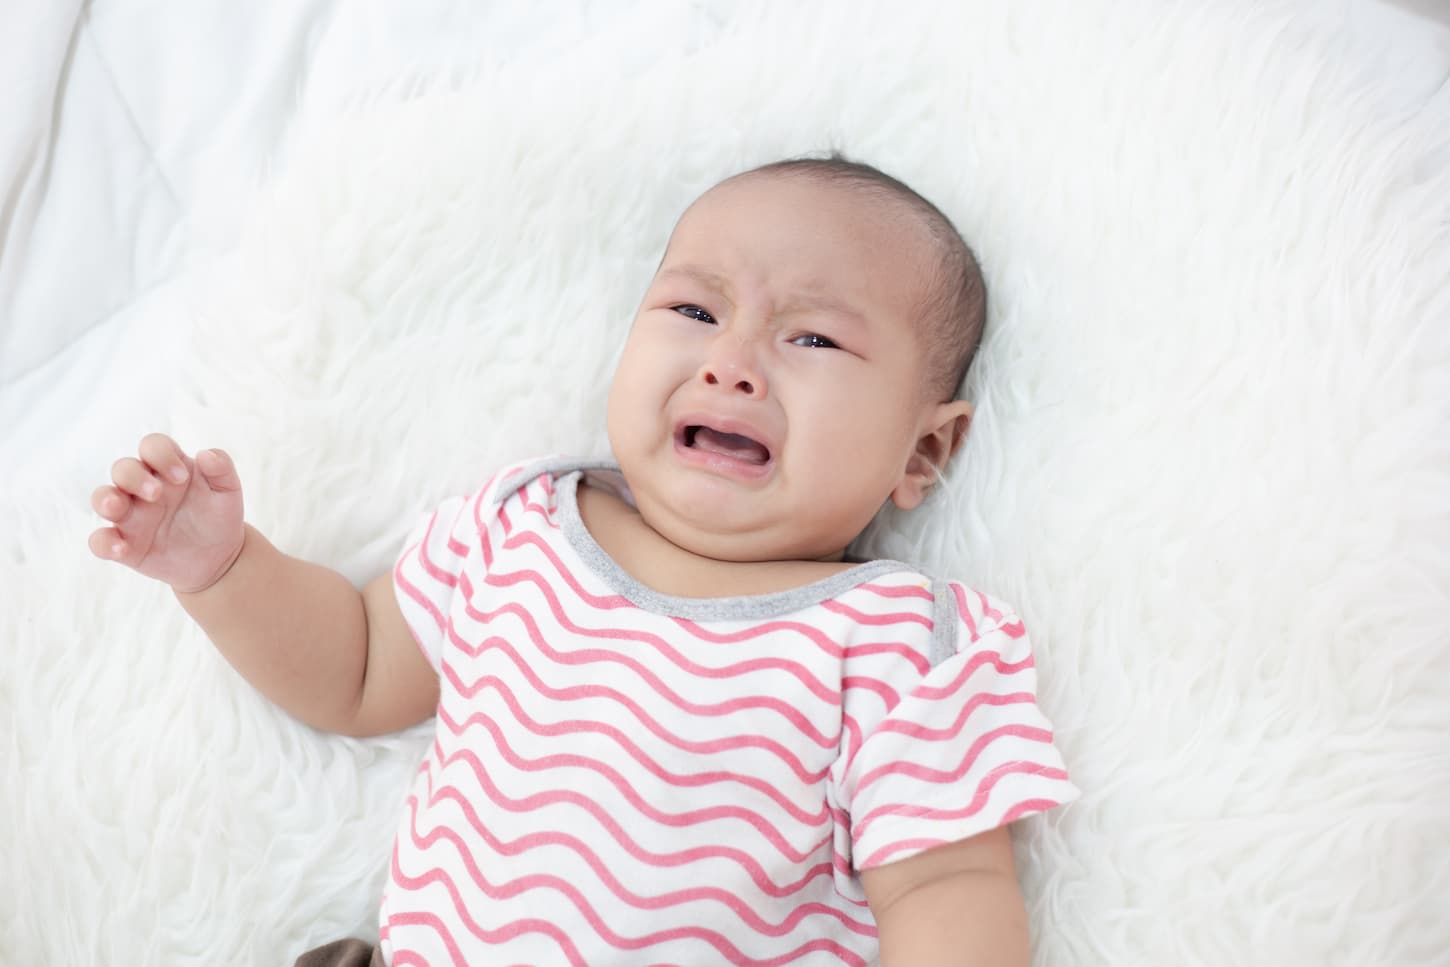 An image of a baby girl wearing a pink-striped short sleeve baby suit while crying in a crib.